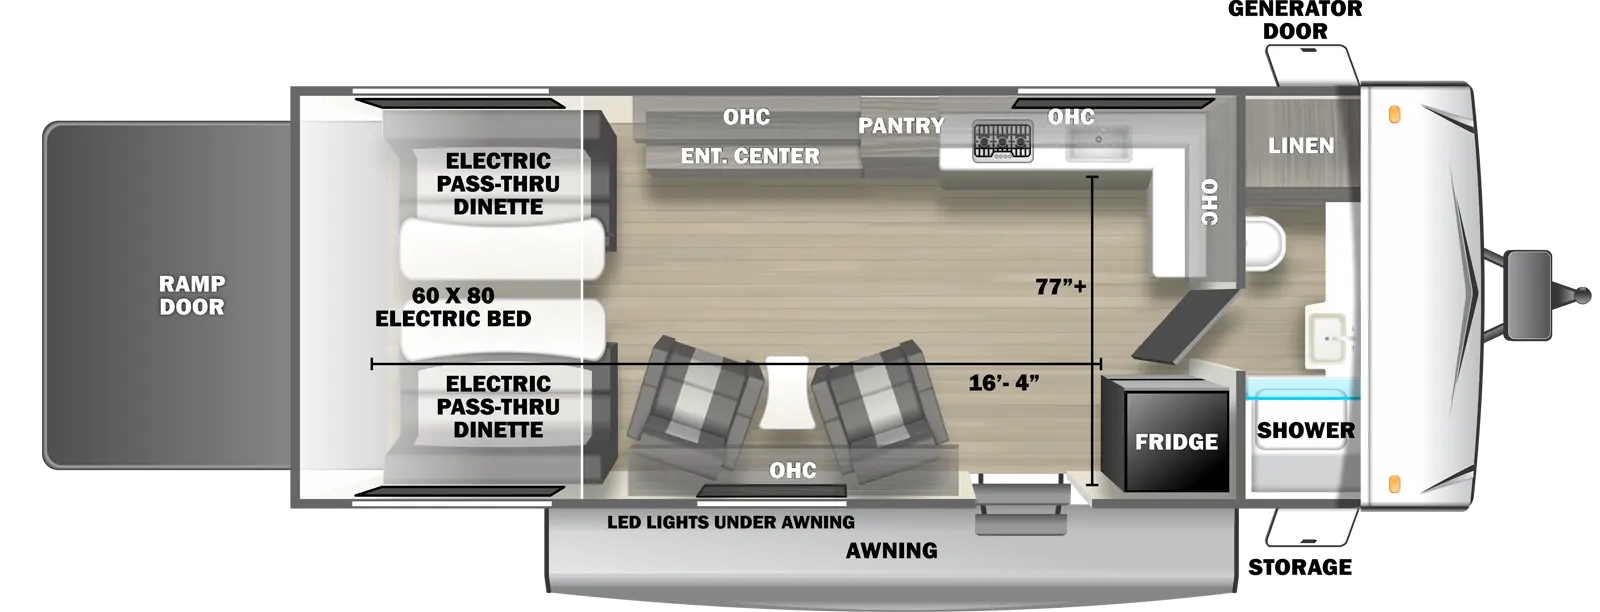 The 2450SRX travel trailer has no slide outs, 1 entry door and 1 rear ramp door. Exterior features include an awning with LED lights, front door side storage and front off-door side generator door. Interior layout from front to back includes: front bathroom with linen storage, toilet, countertop, sink and shower; kitchen with refrigerator next to entry door, L-shaped off-door side countertop with overhead cabinets, stovetop, and kitchen sink; off-door side pantry; 2 door side recliners with end table; off-door side entertainment center across from the recliners; and rear electric 60 x 80 bed with opposing side electric pass-through dinette. Cargo length from rear of unit to refrigerator is 16 ft. 4 in. Cargo width from kitchen countertop to door side wall is 77 inches.